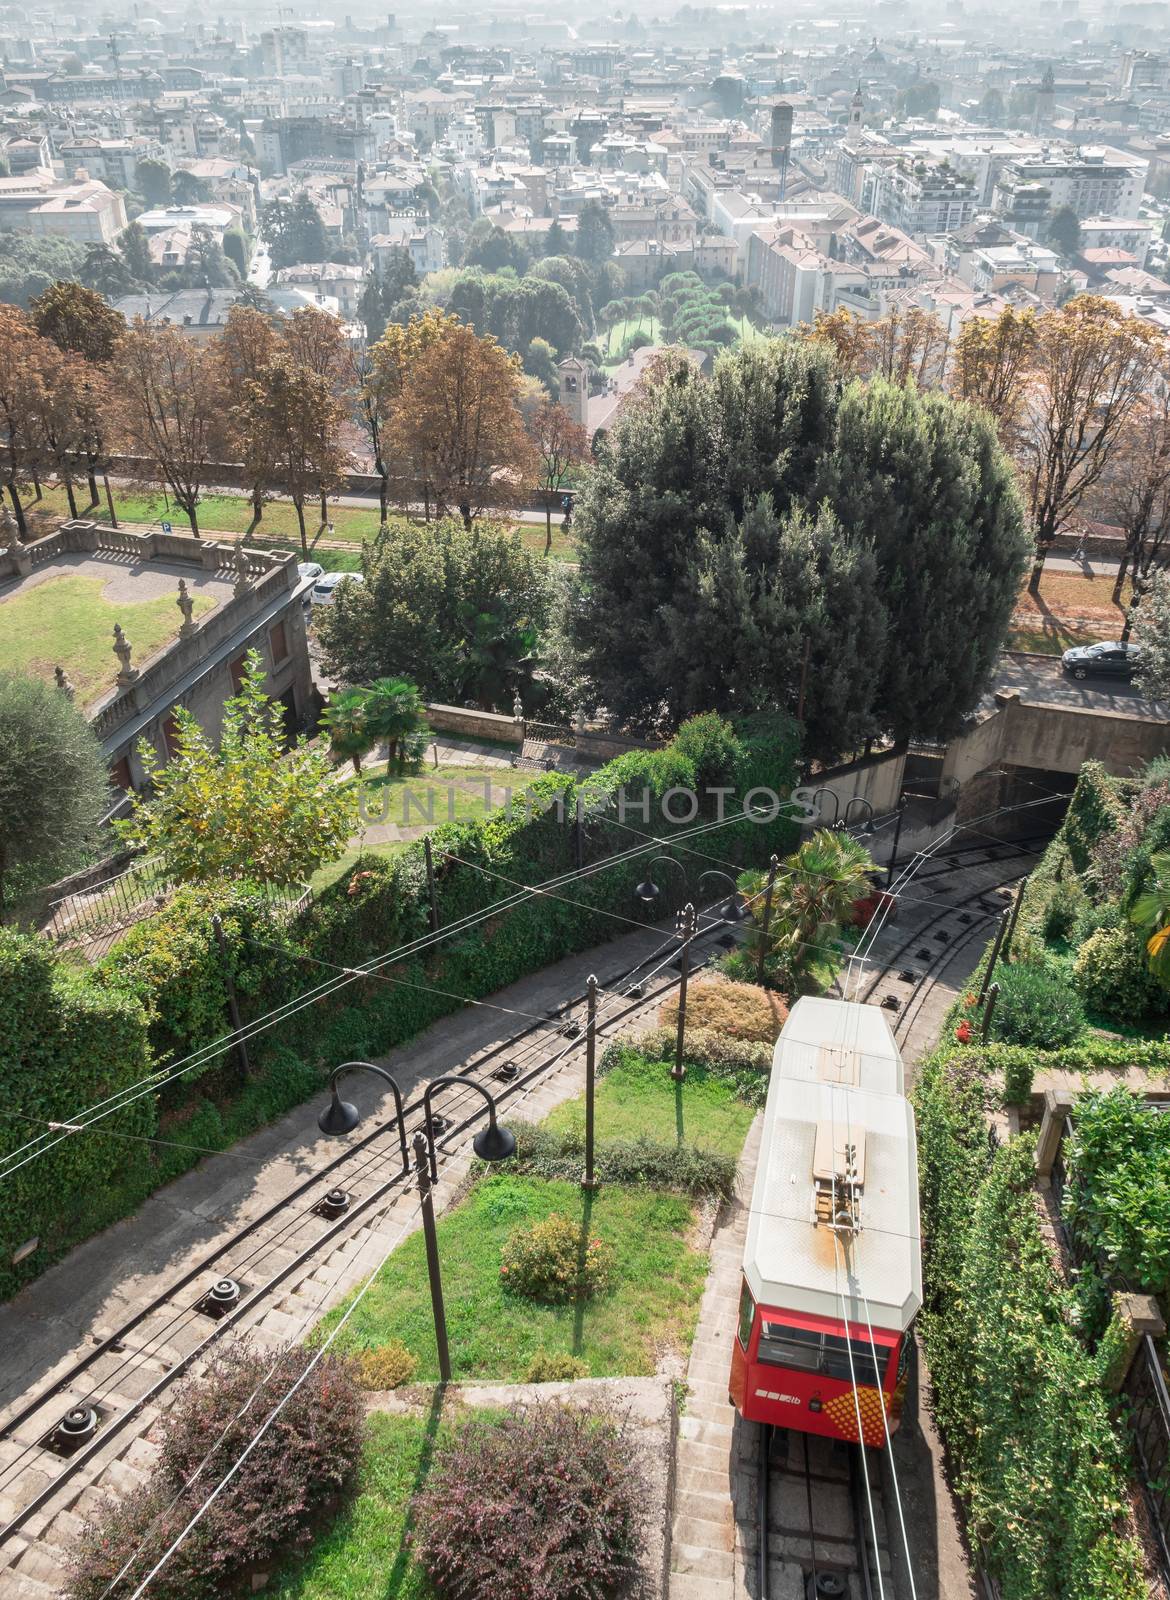 Red funicular in the old city of Bergamo by germanopoli